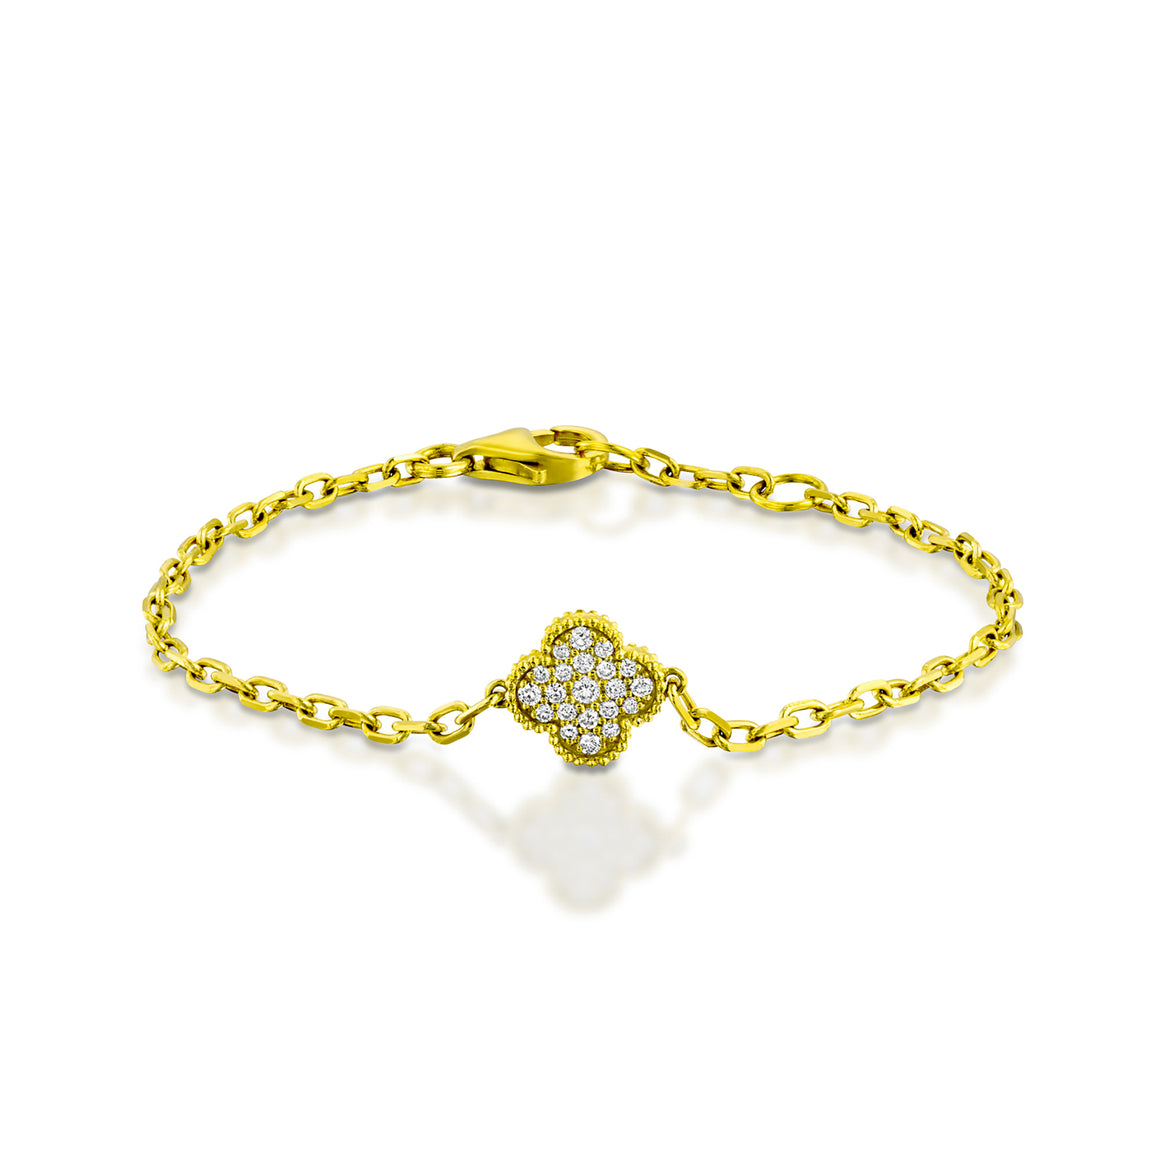 18k Yellow gold Loop bracelet, diamond clover set with 33 diamonds 0.27ct A delicate and special bracelet.